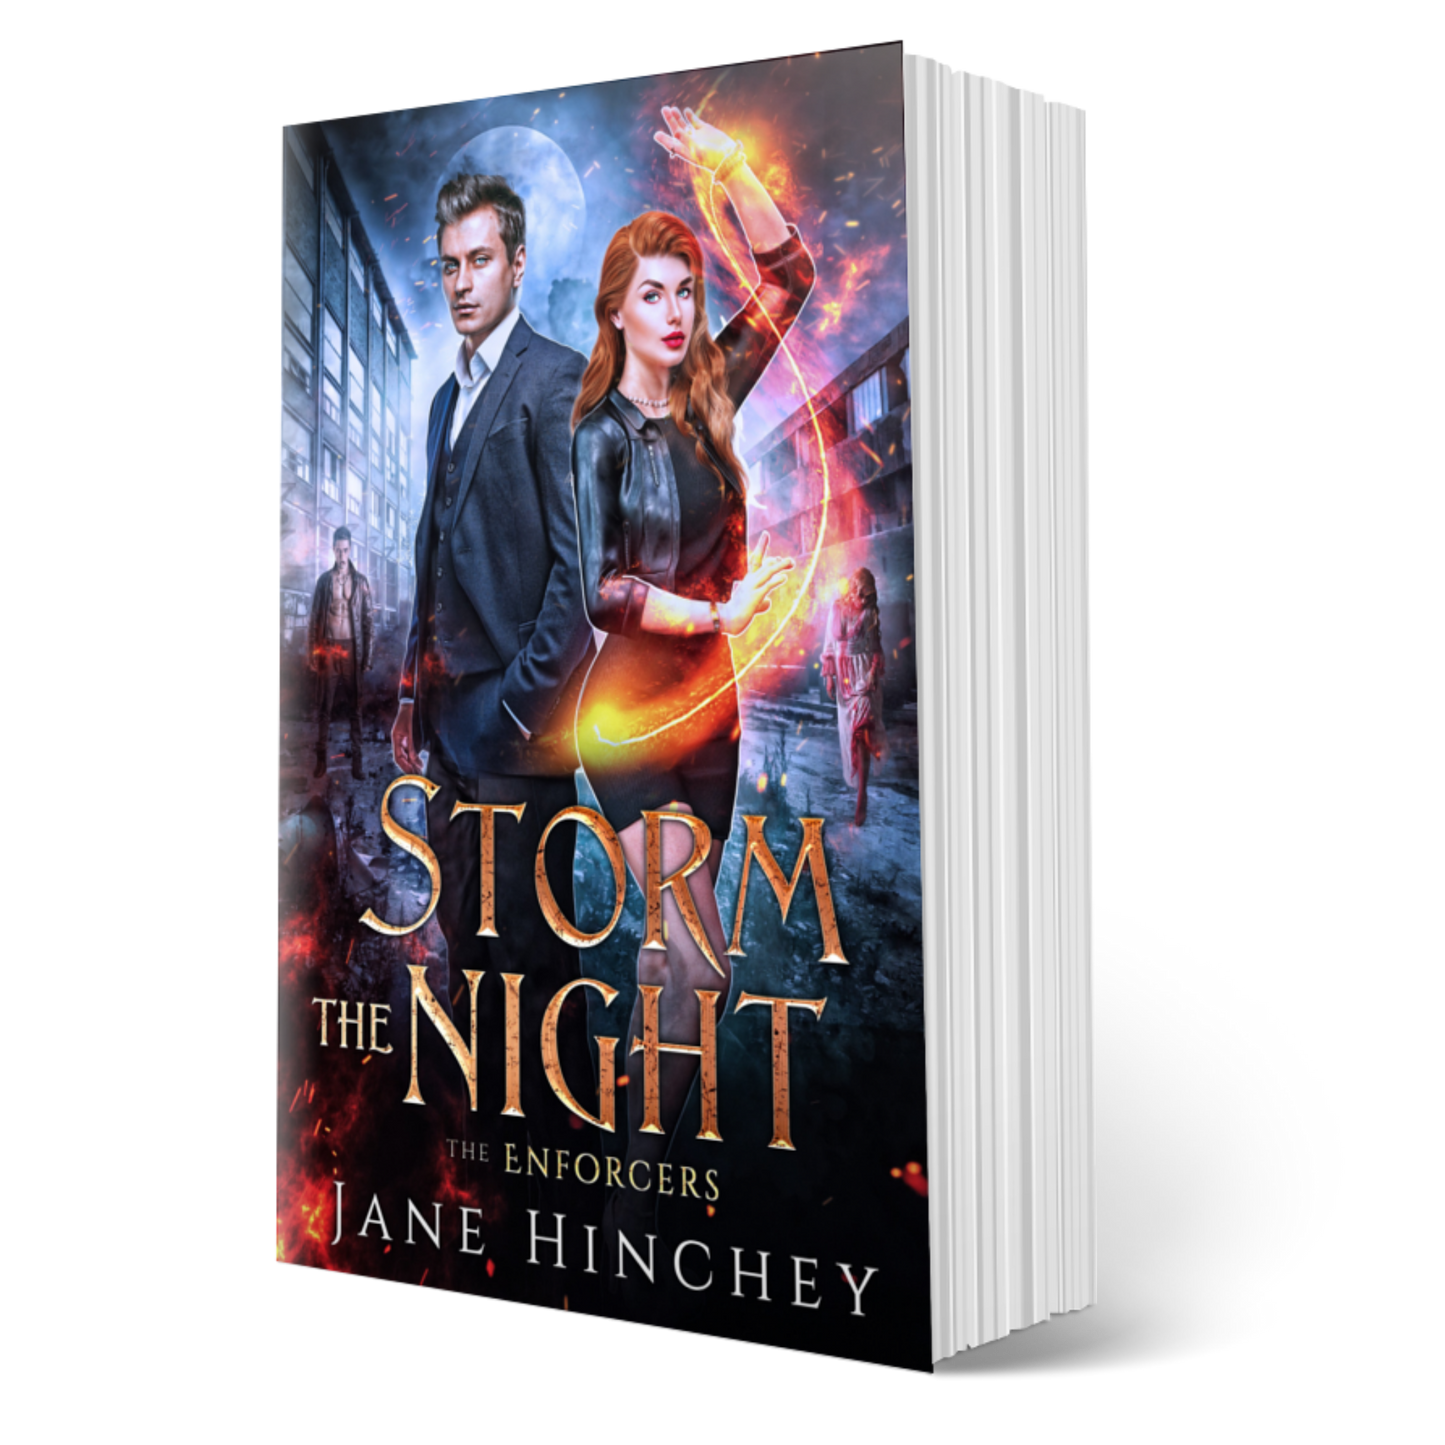 Storm the Night by Jane Hinchey